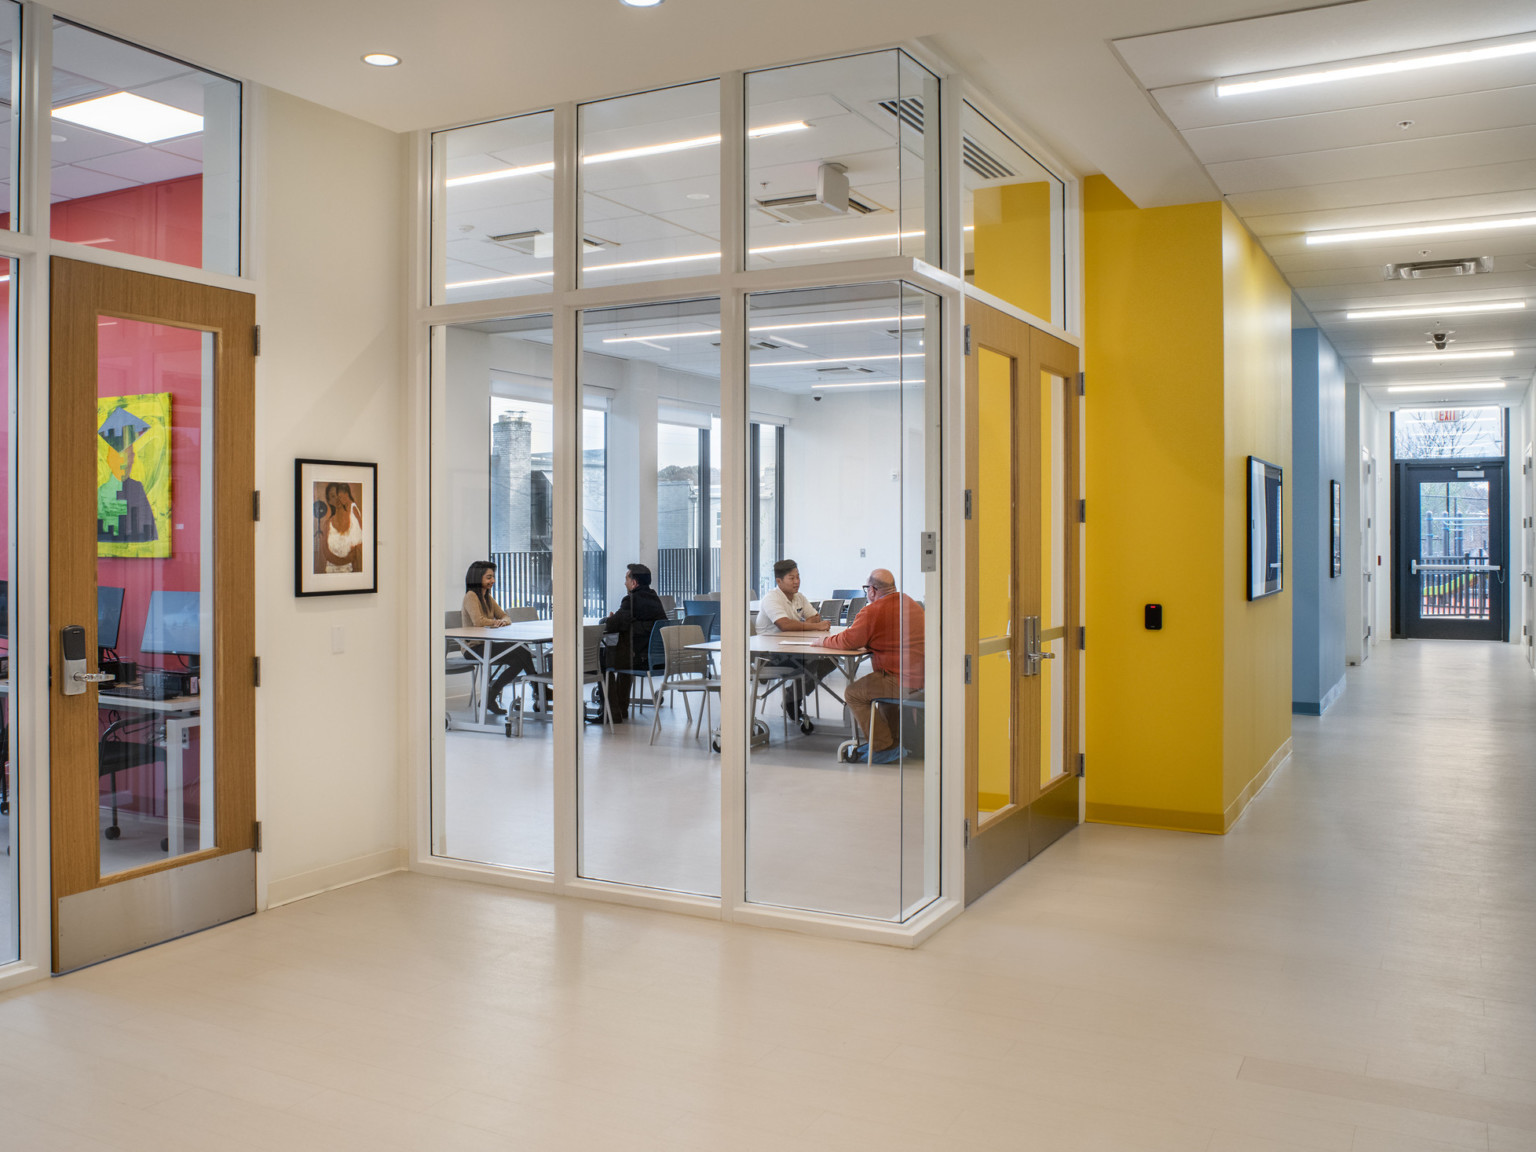 Colorful hallway with transparent glass wall room at center where pairs sit at tables